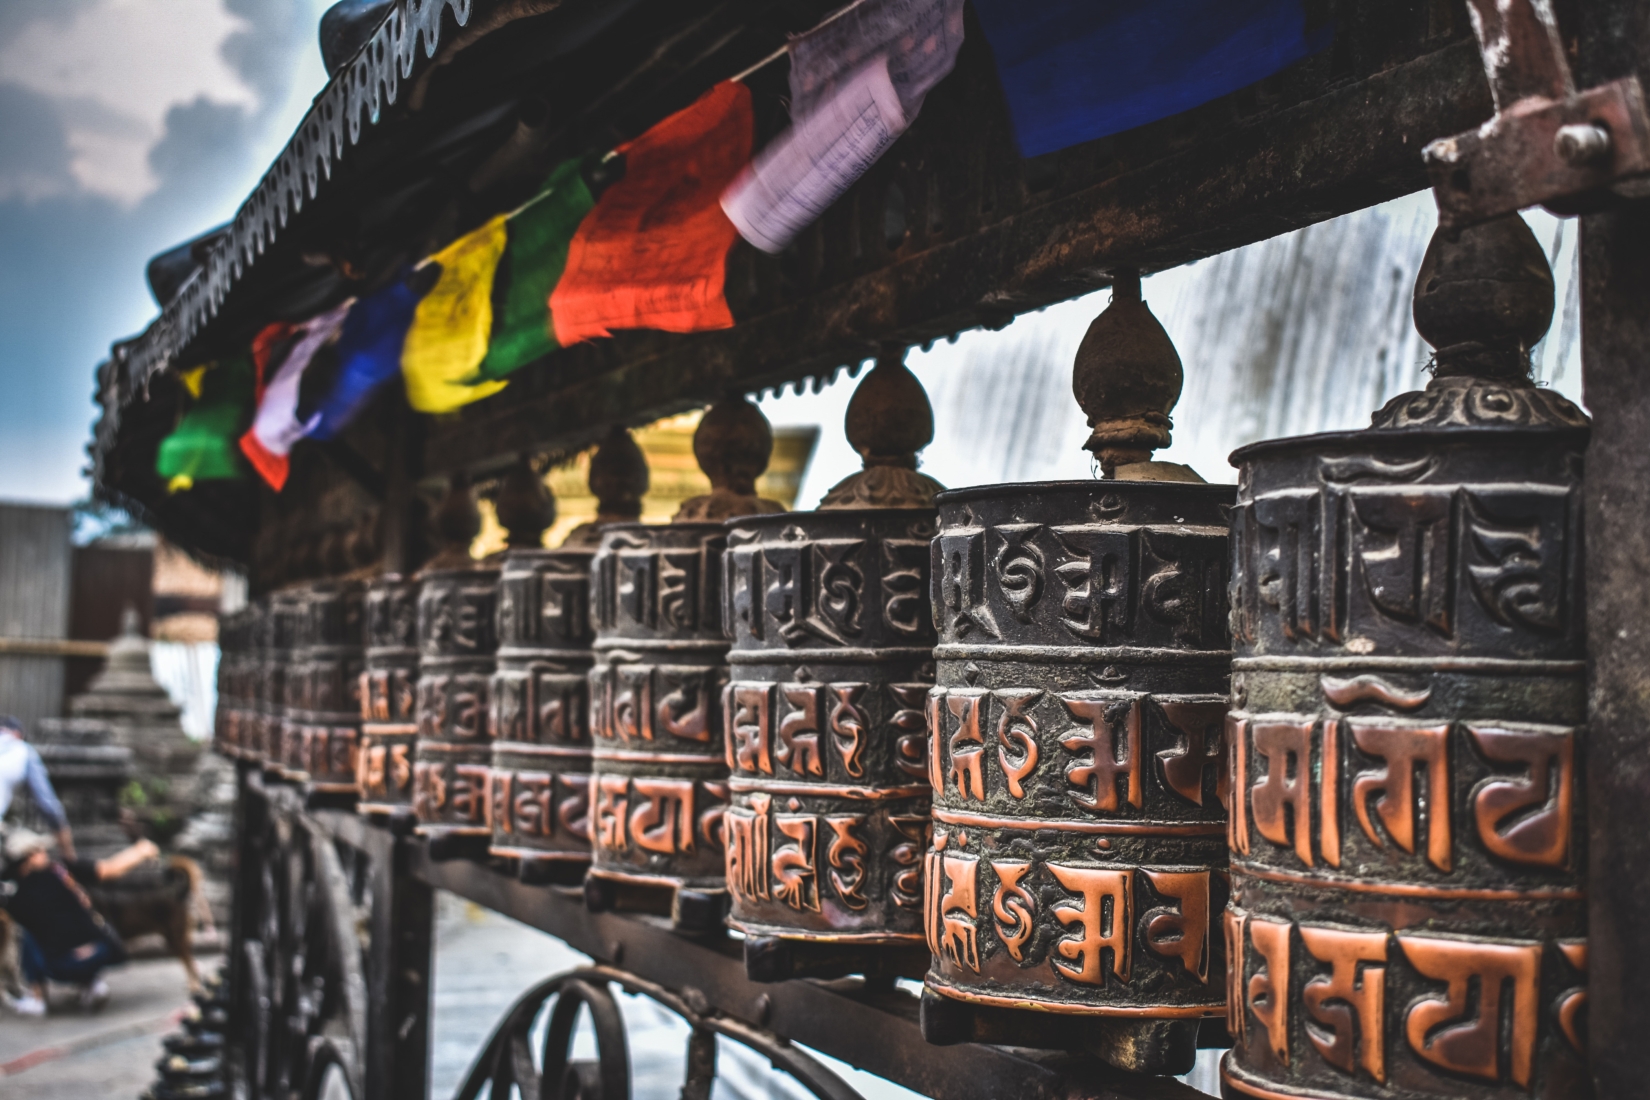 Buddhist prayer wheels are pictured in a row in Nepal